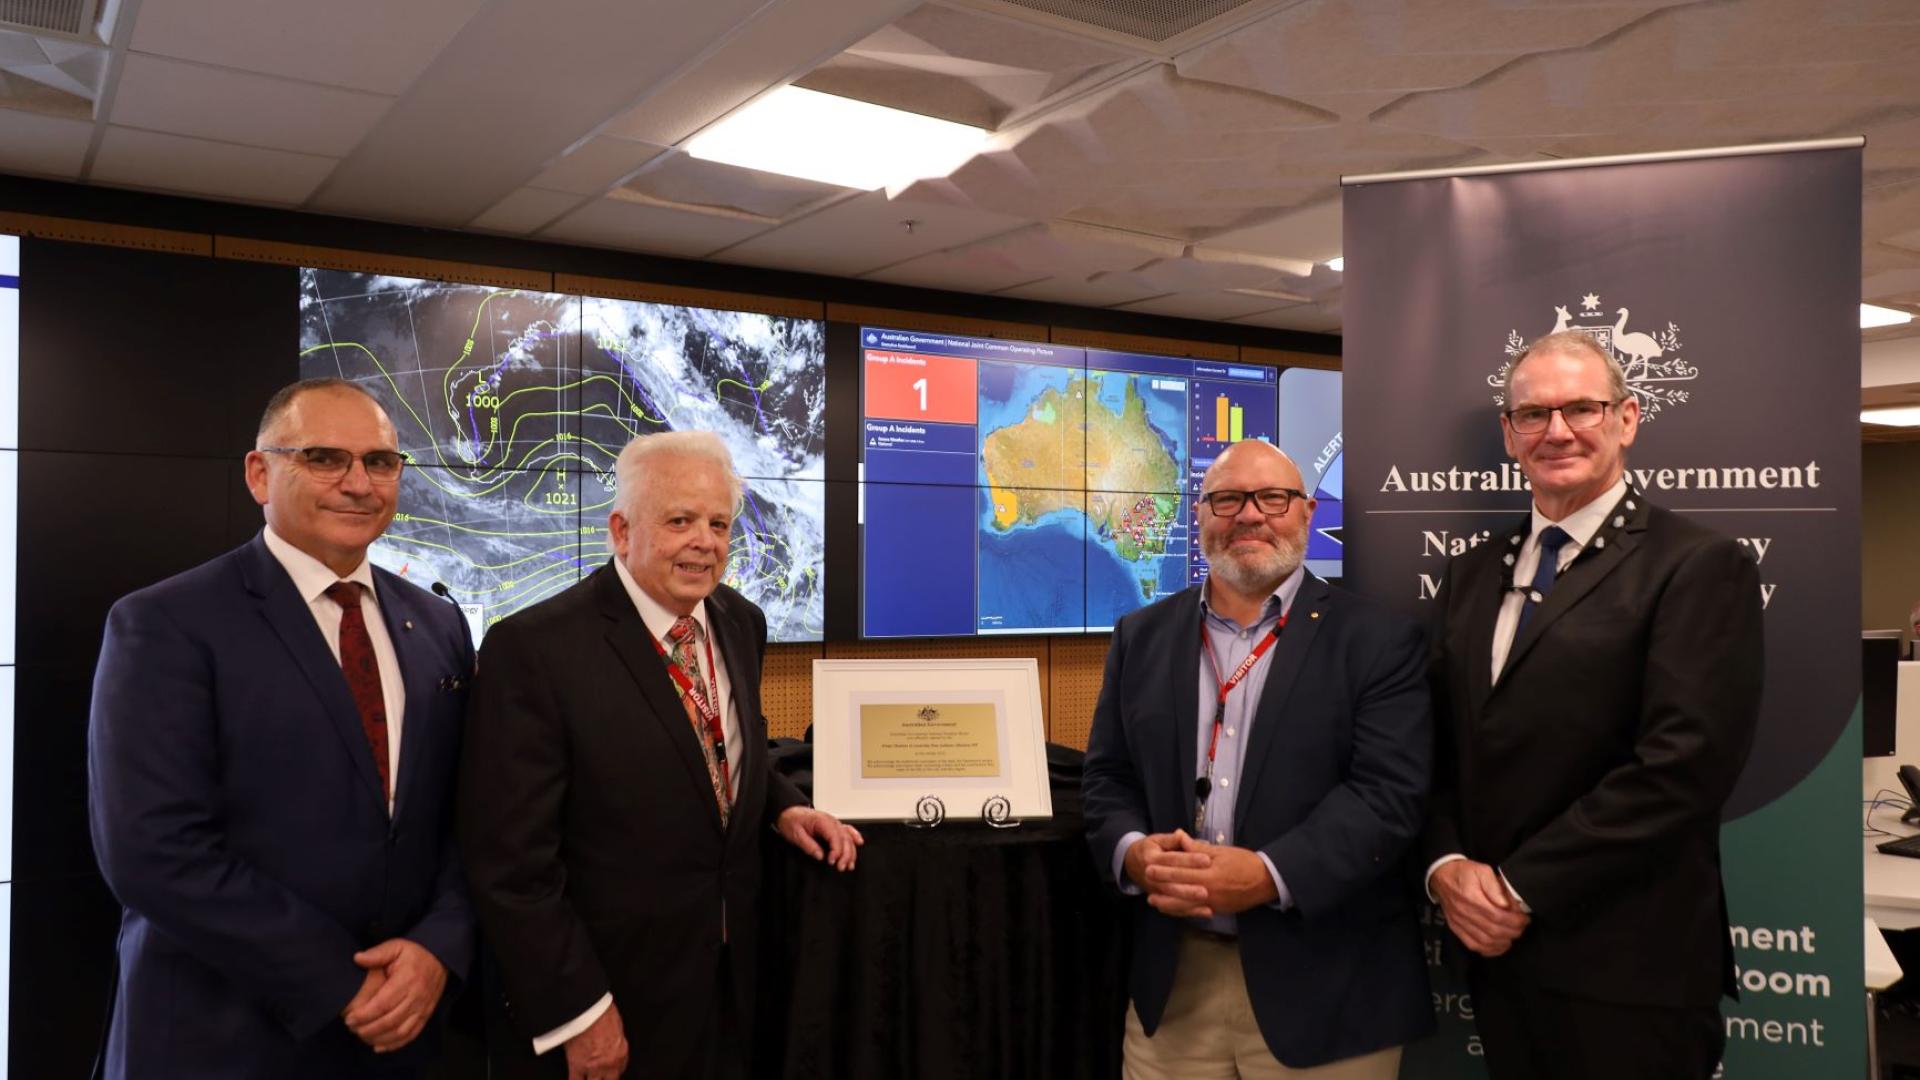 Brendan Moon, Joe Buffone, Rob Cameron and David Templeman posing in front of the digital screen of the National Situation Room.